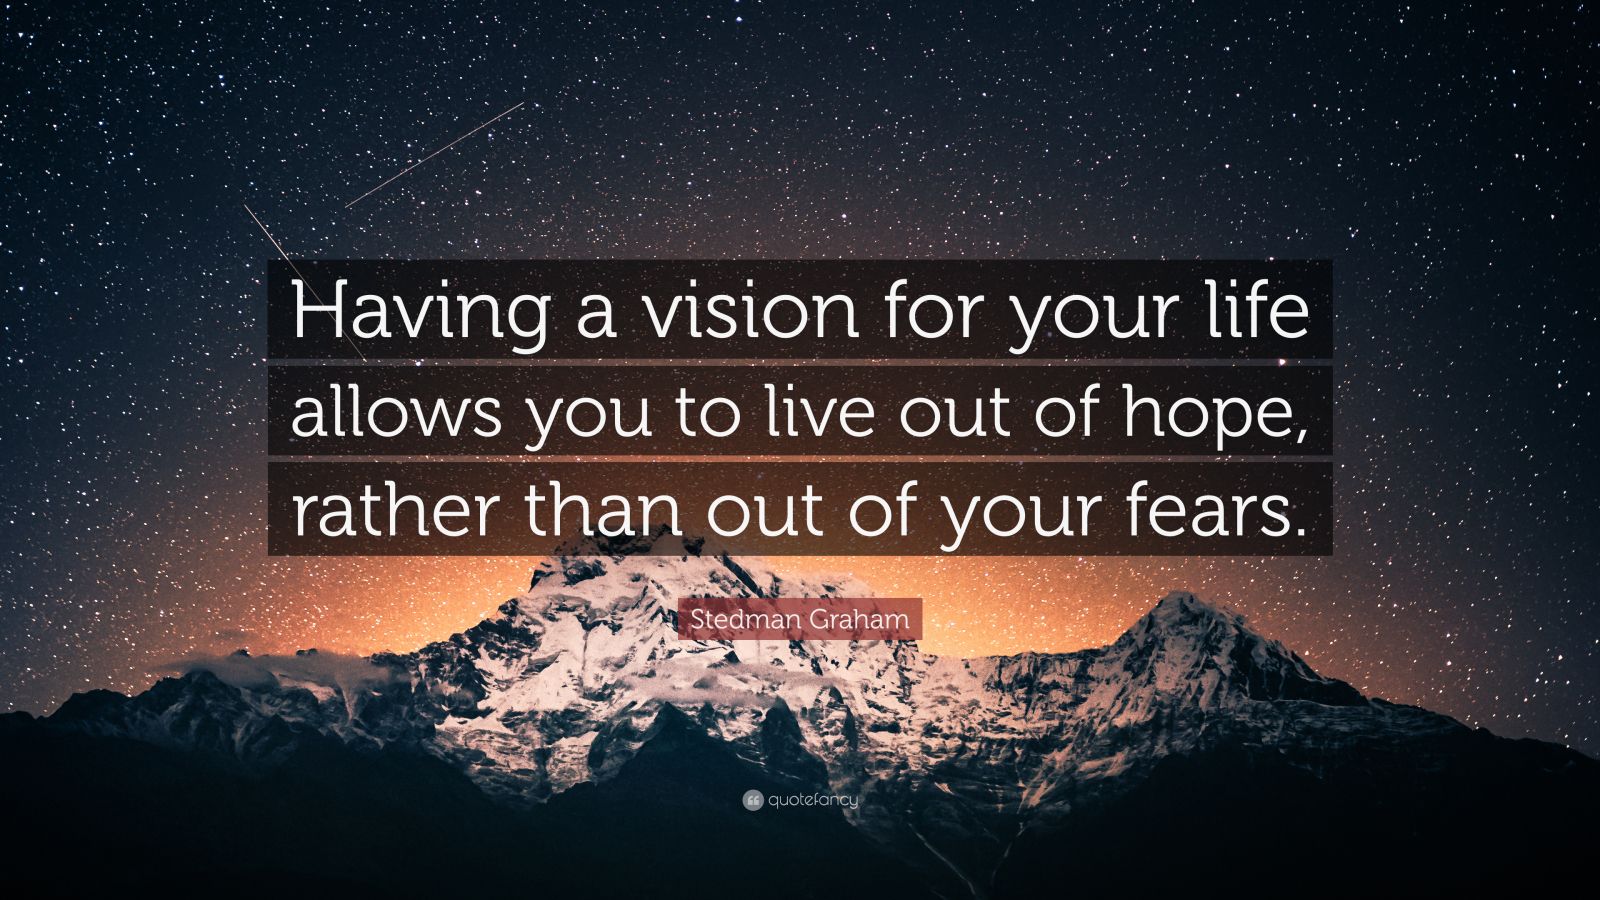 Stedman Graham Quote: “Having a vision for your life allows you to live ...